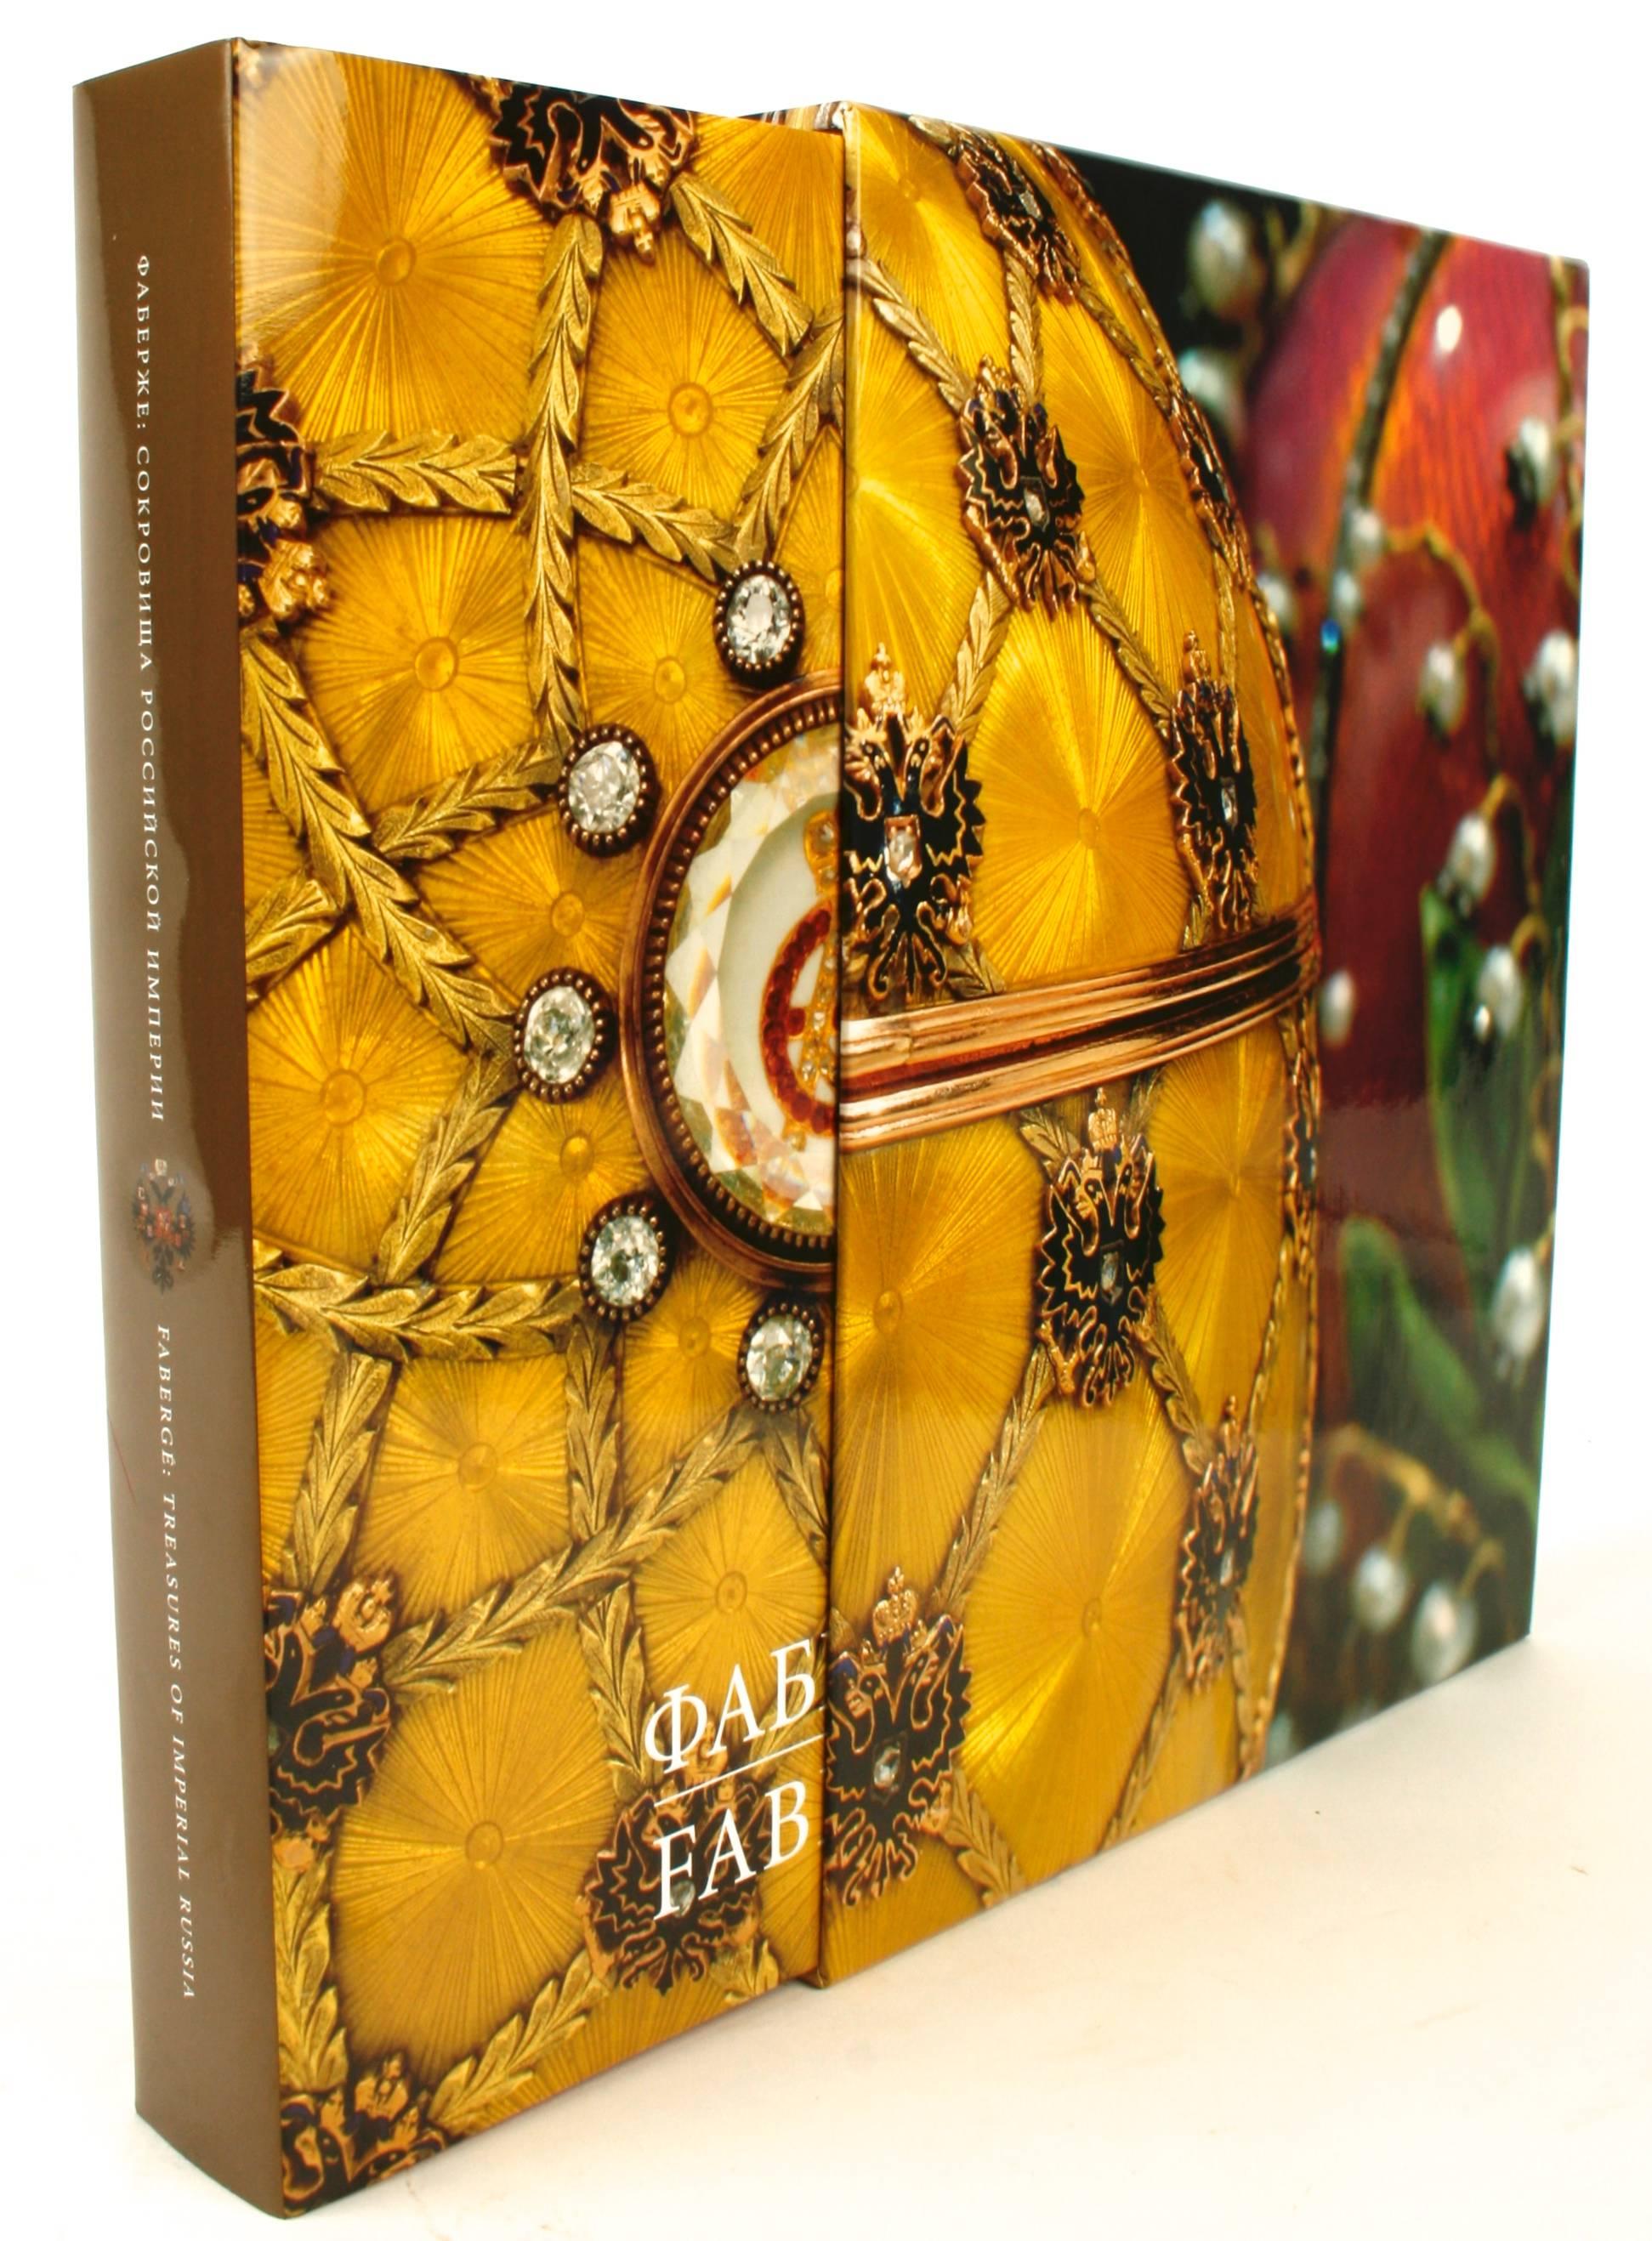 Fabergé: Treasures of Imperial Russia by Géza von Habsburg. Saint Petersburg: The Link of Times Foundation. First edition hardcover with dust jacket and slip case, 2005. 352 pp. Beautiful collector's edition book dedicated to Peter Carl Faberge's